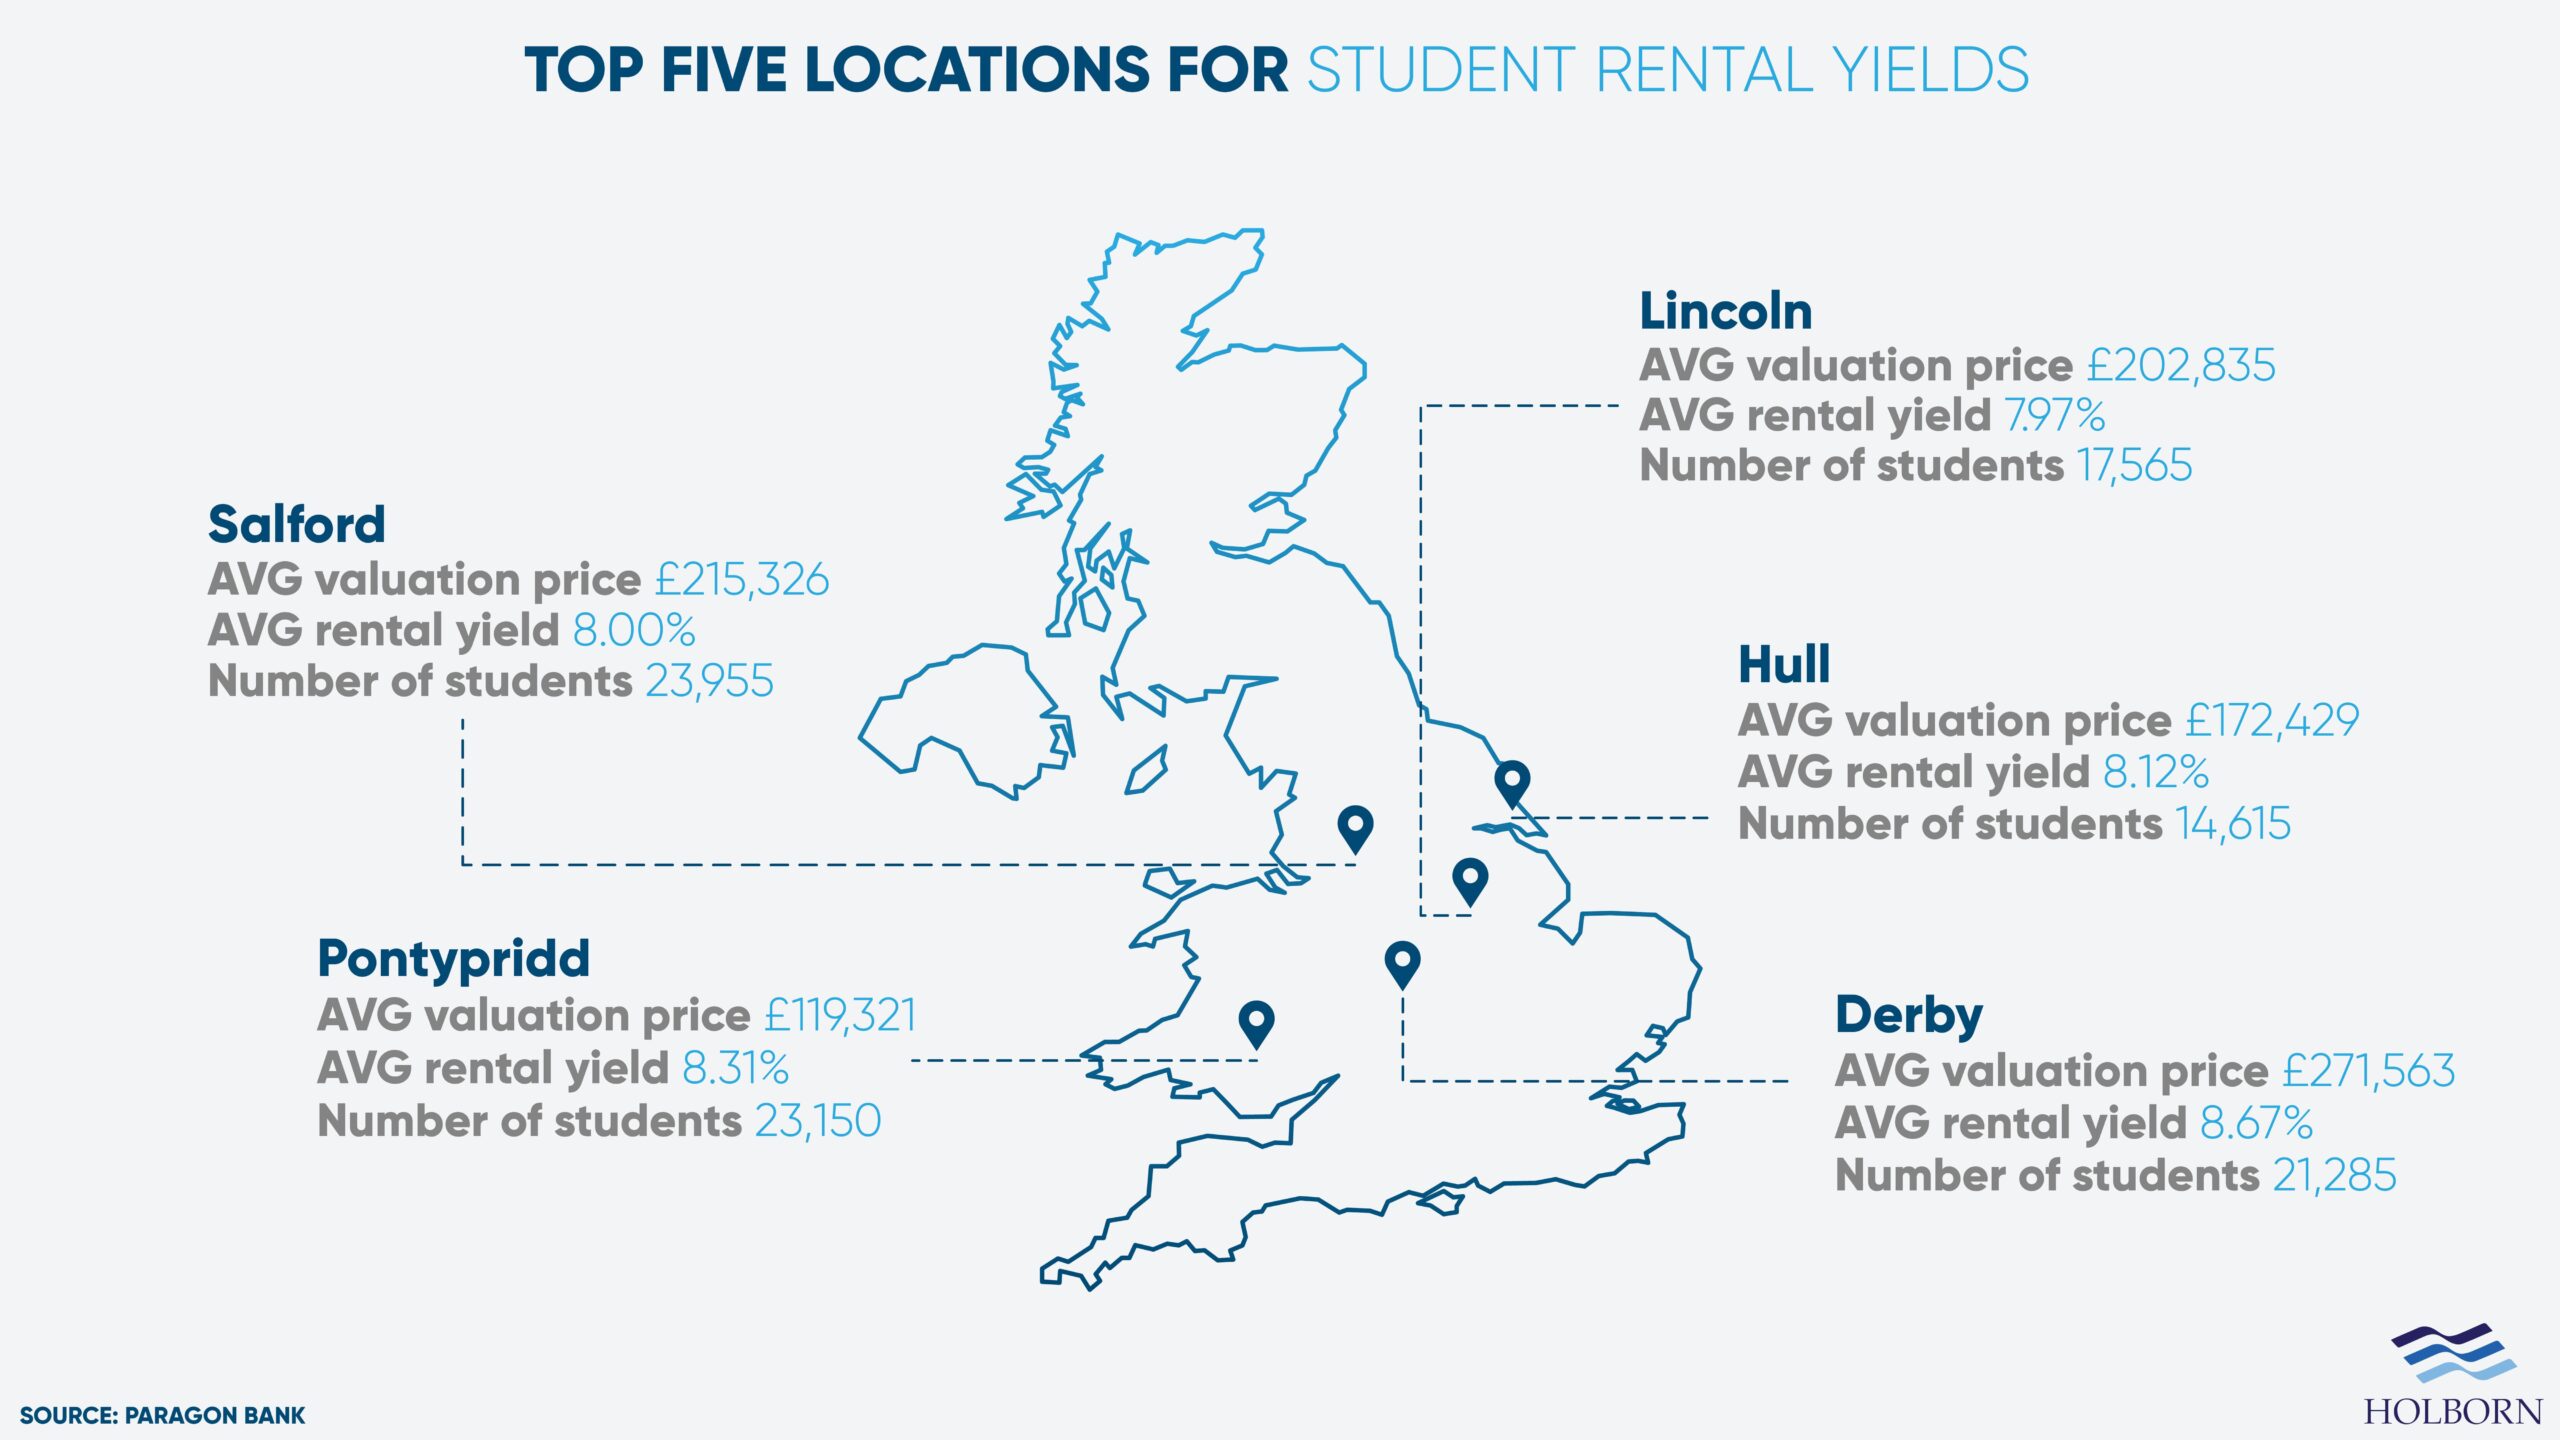 list of student top rental yields in uk